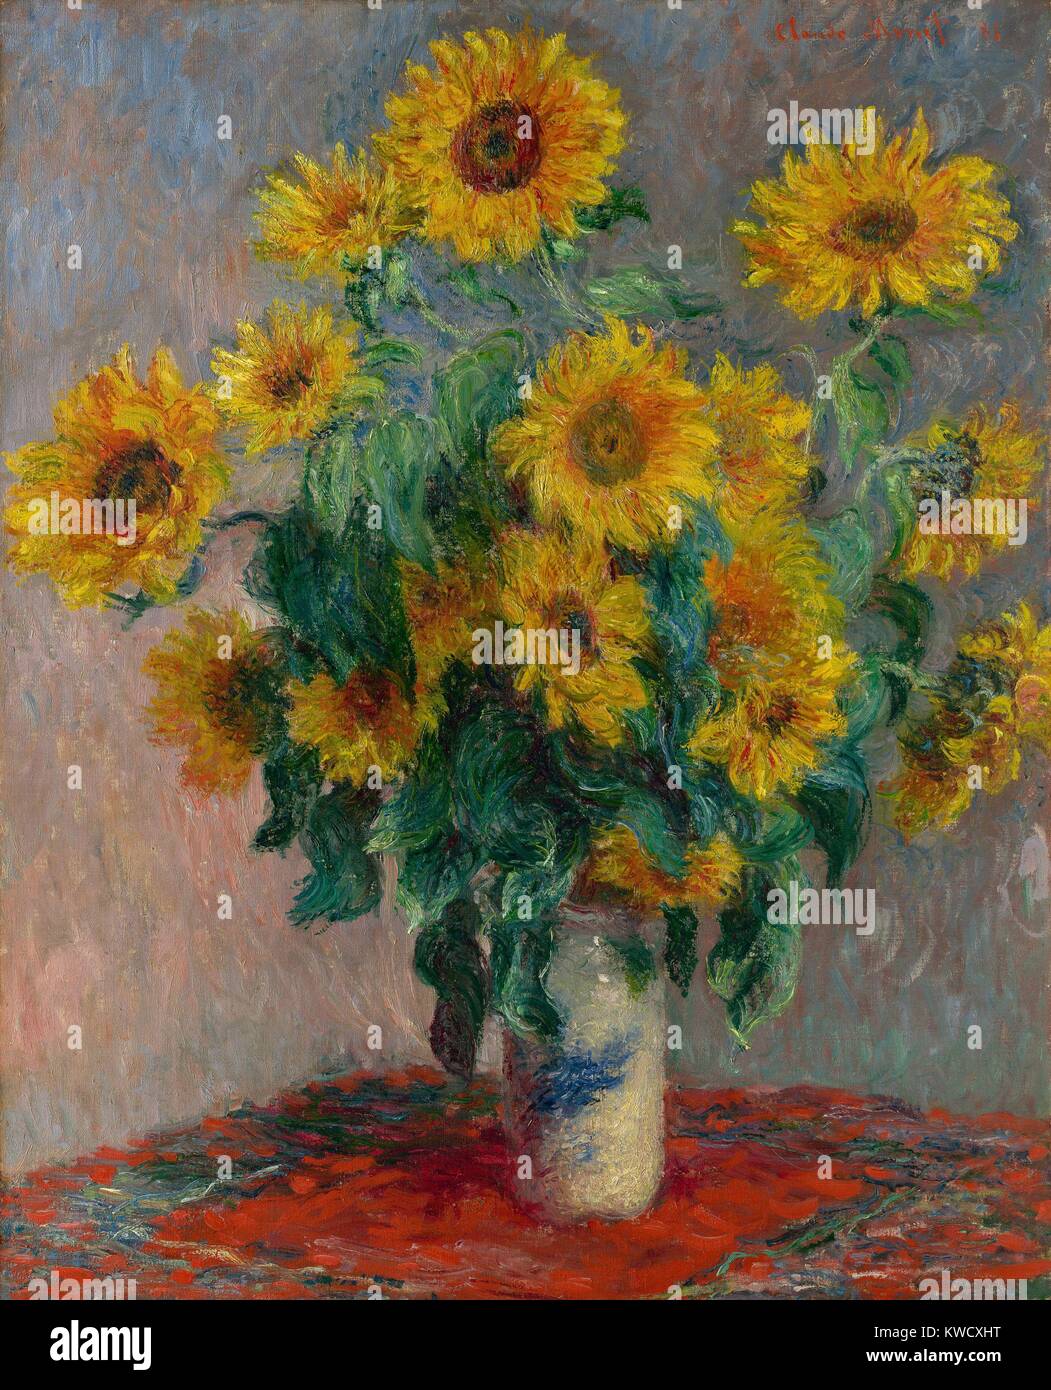 Bouquet of Sunflowers, by Claude Monet, 1881, French impressionist painting, oil on canvas. Sunflowers in a Japanese vase on a red tablecloth (BSLOC 2017 3 33) Stock Photo